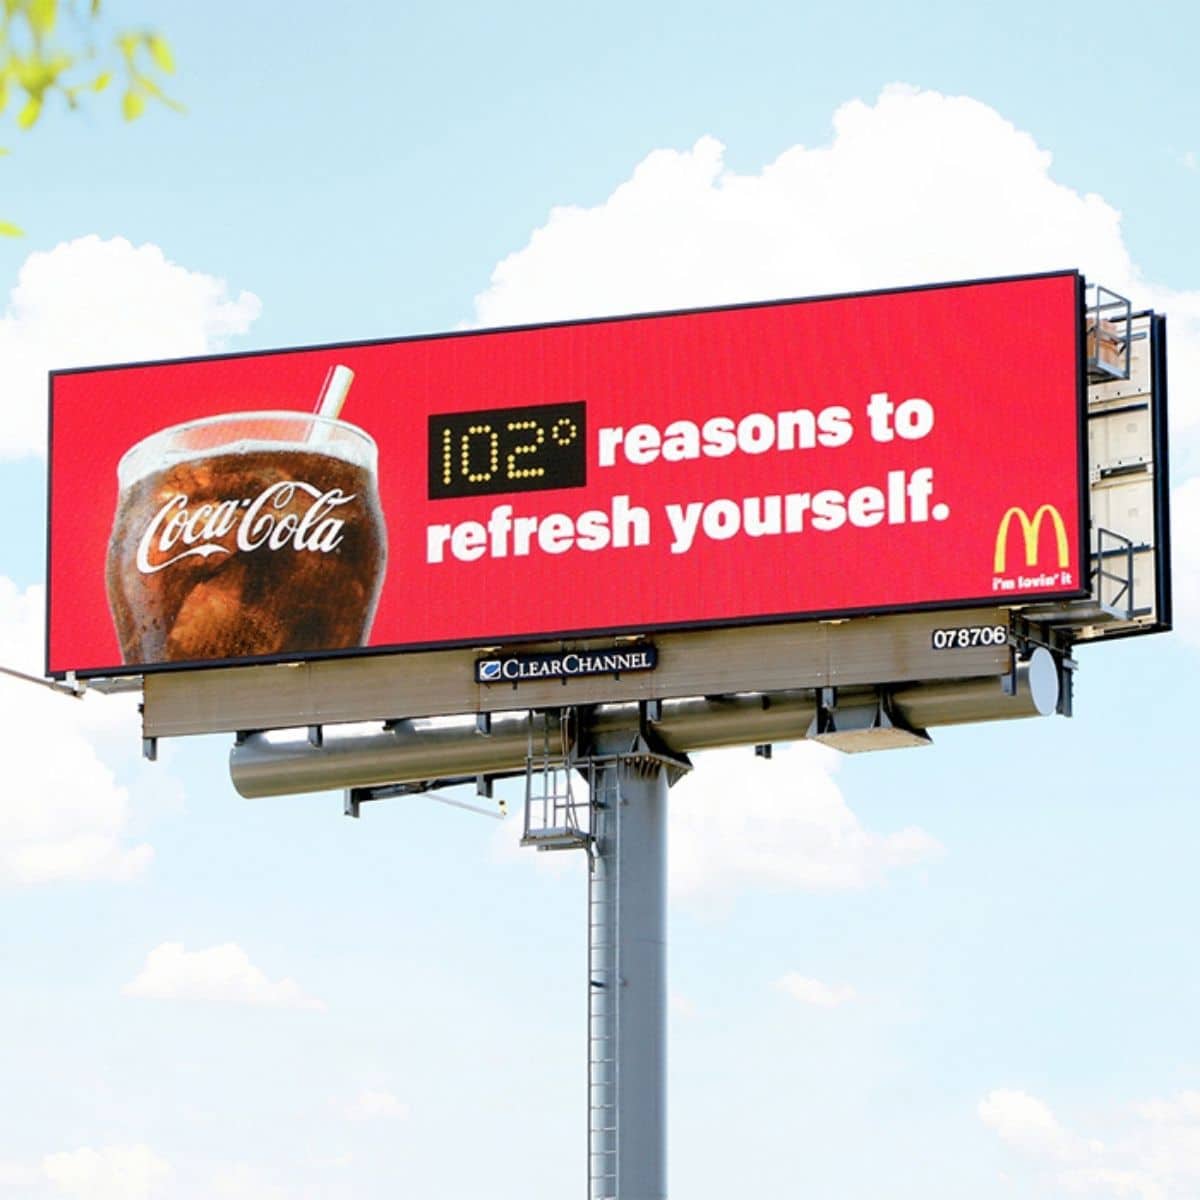 Creative Billboards That Deserve an Award – Page 31